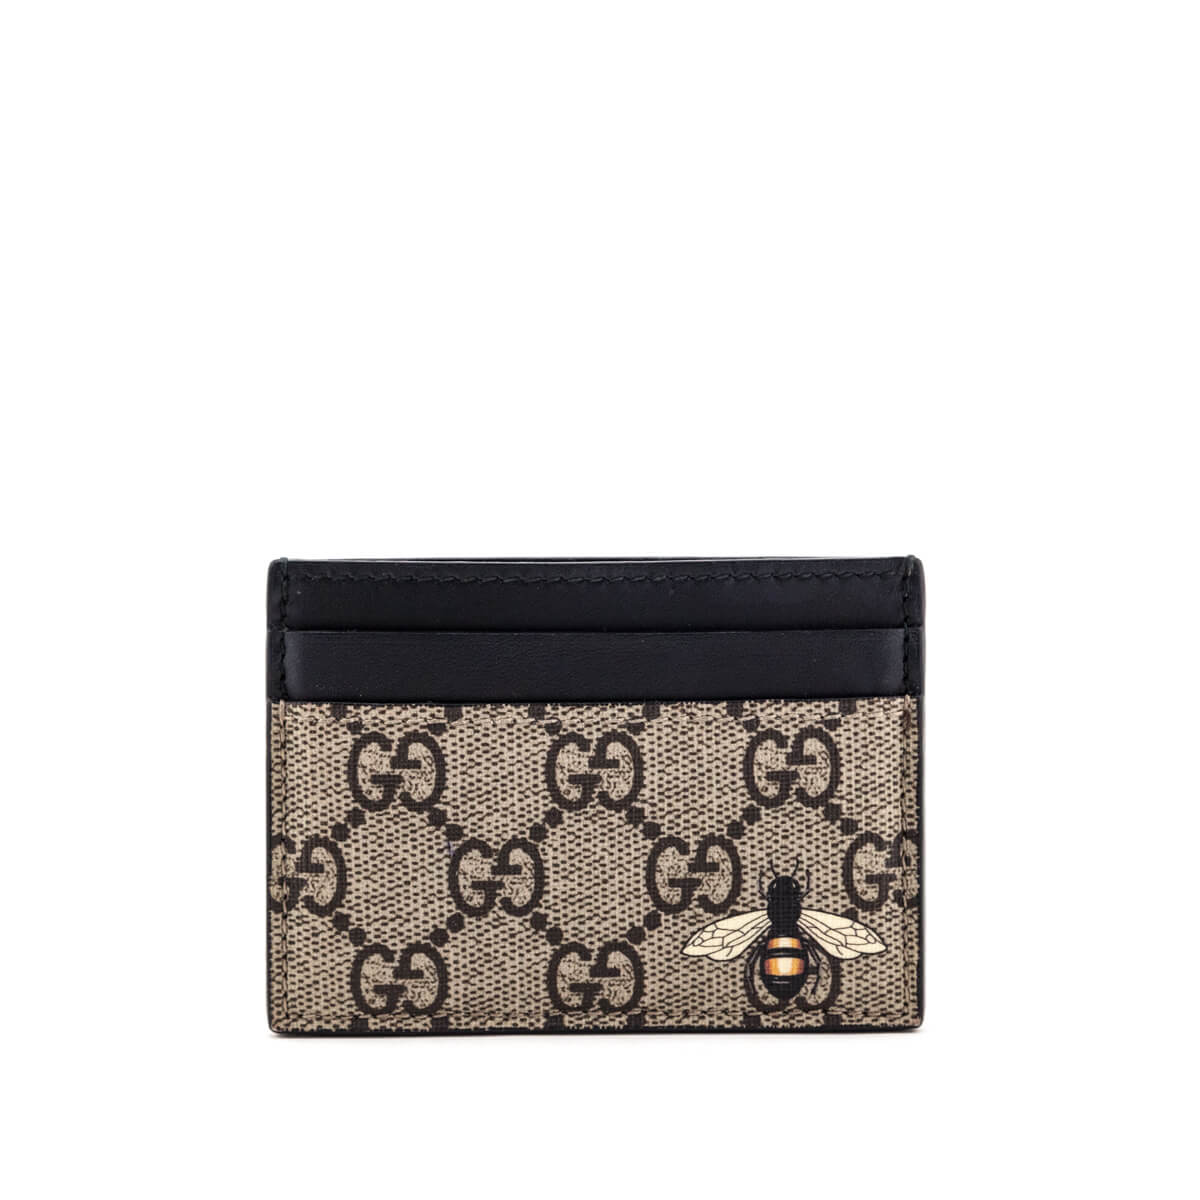 Gucci Bee Print GG Supreme Card Holder - Love that Bag etc - Preowned Authentic Designer Handbags & Preloved Fashions